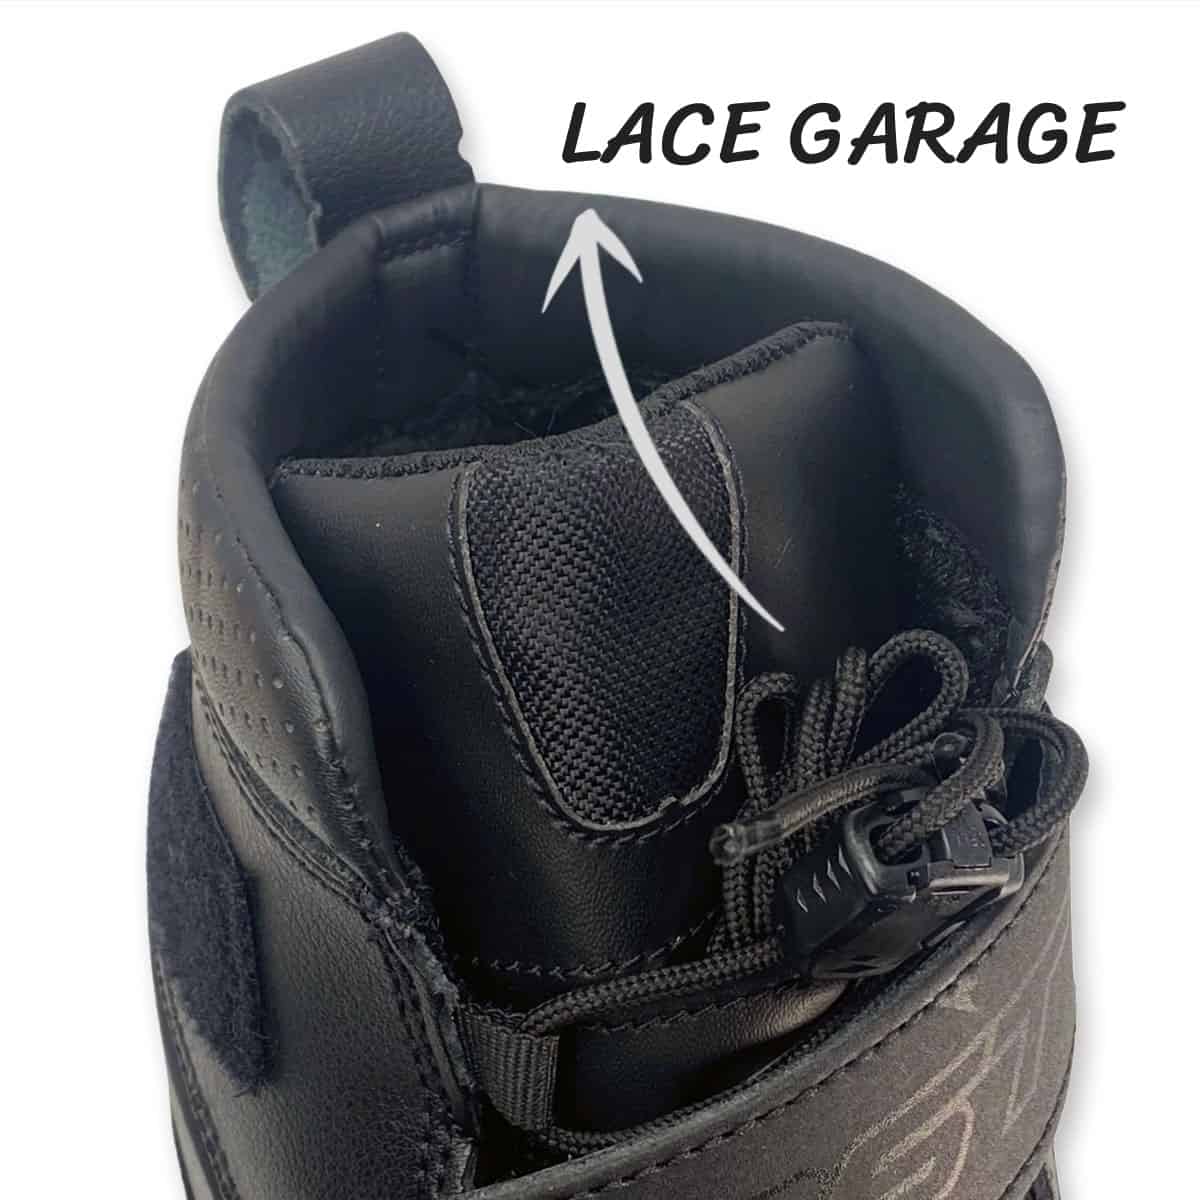 RST Stunt-X CE WP Boots: Short waterproof boot with impact protection - lace garage